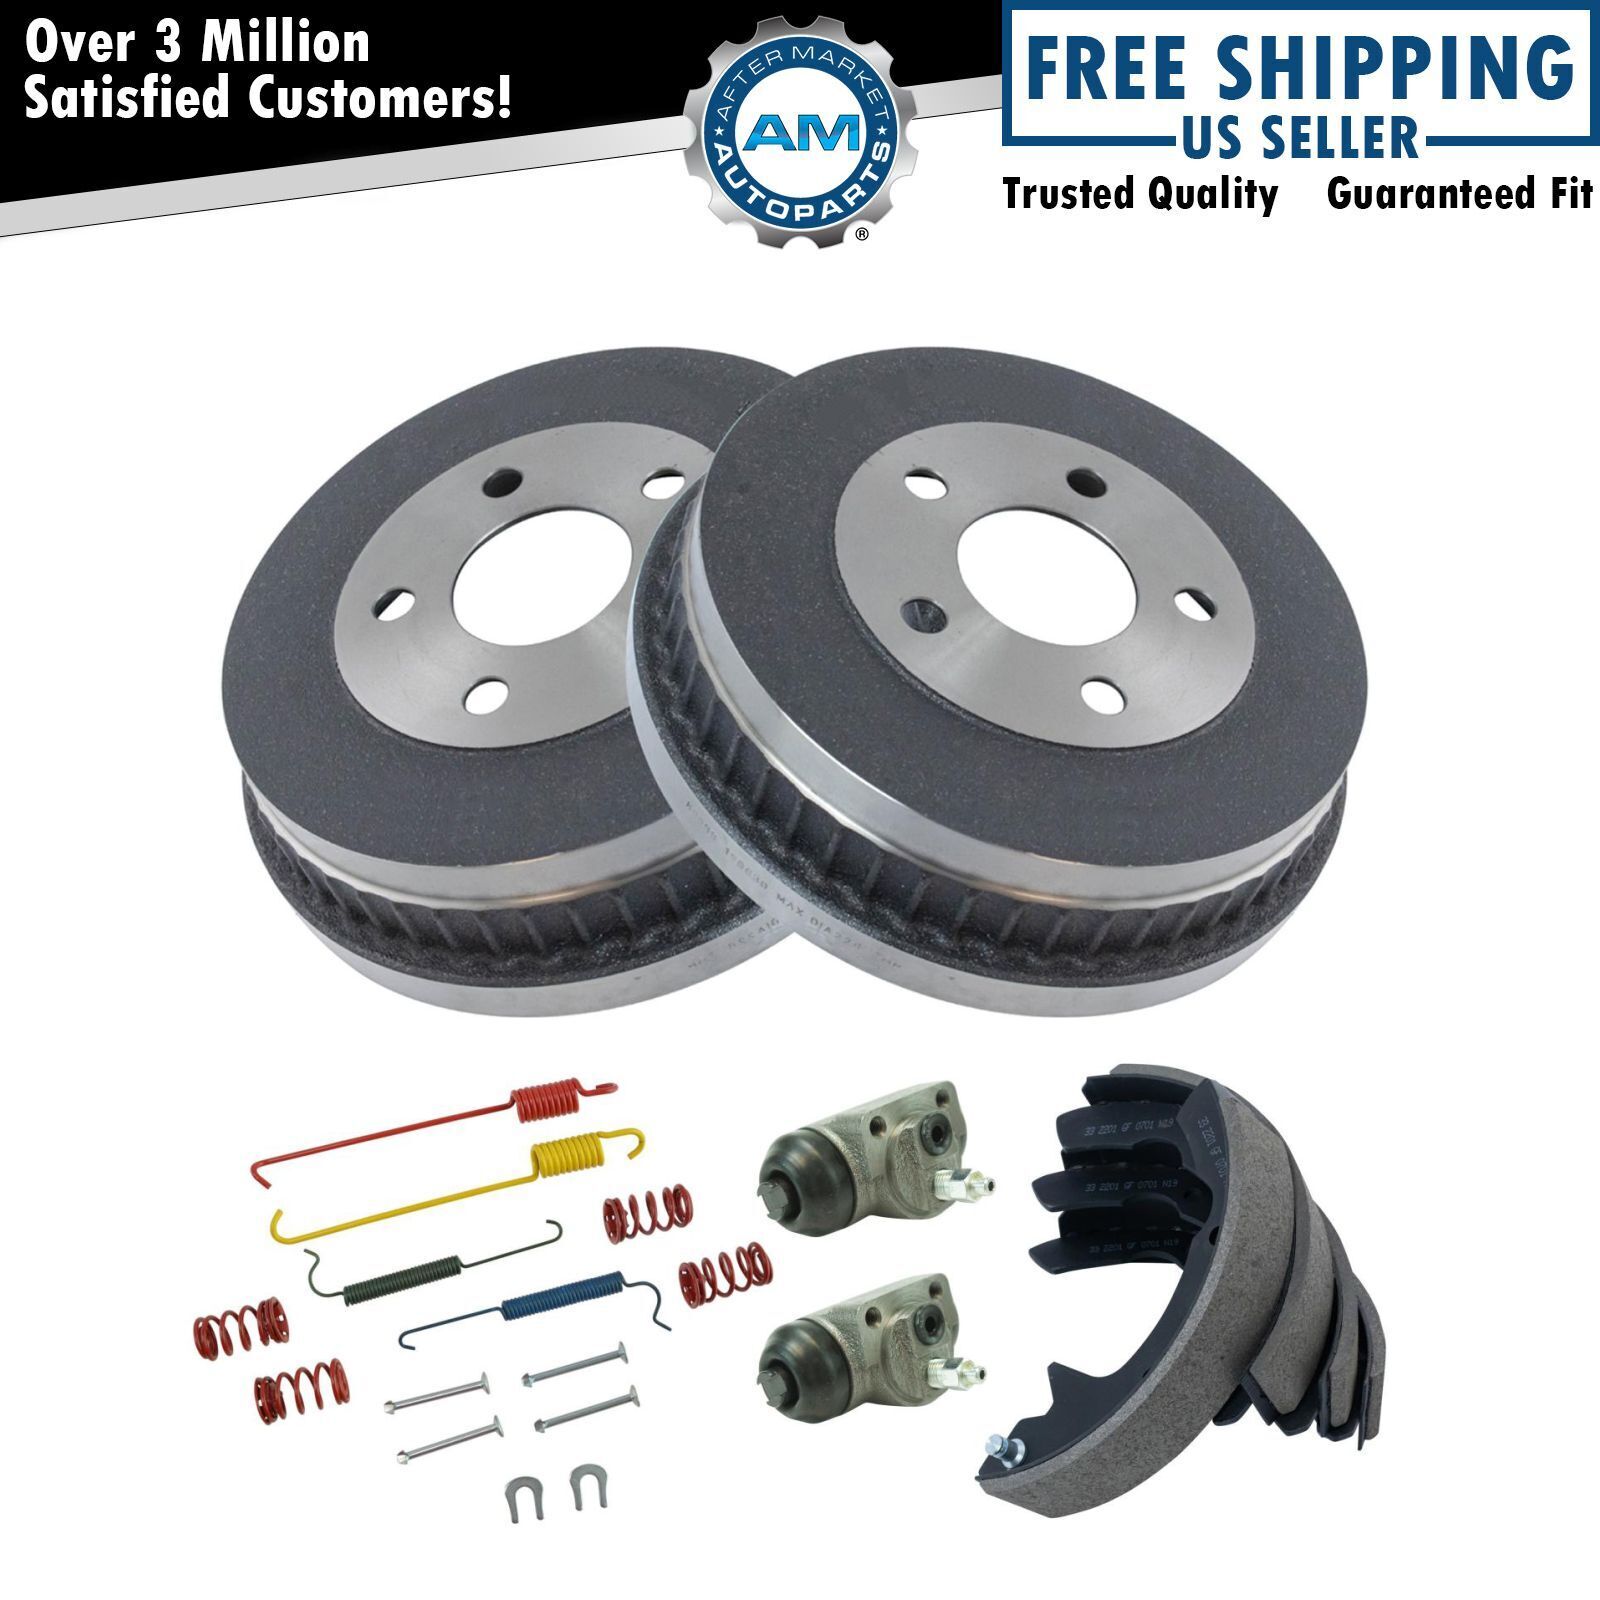 Rear Brake Drums Shoes Hardware & Wheel Cylinders Kit Set for Ford Mercury New